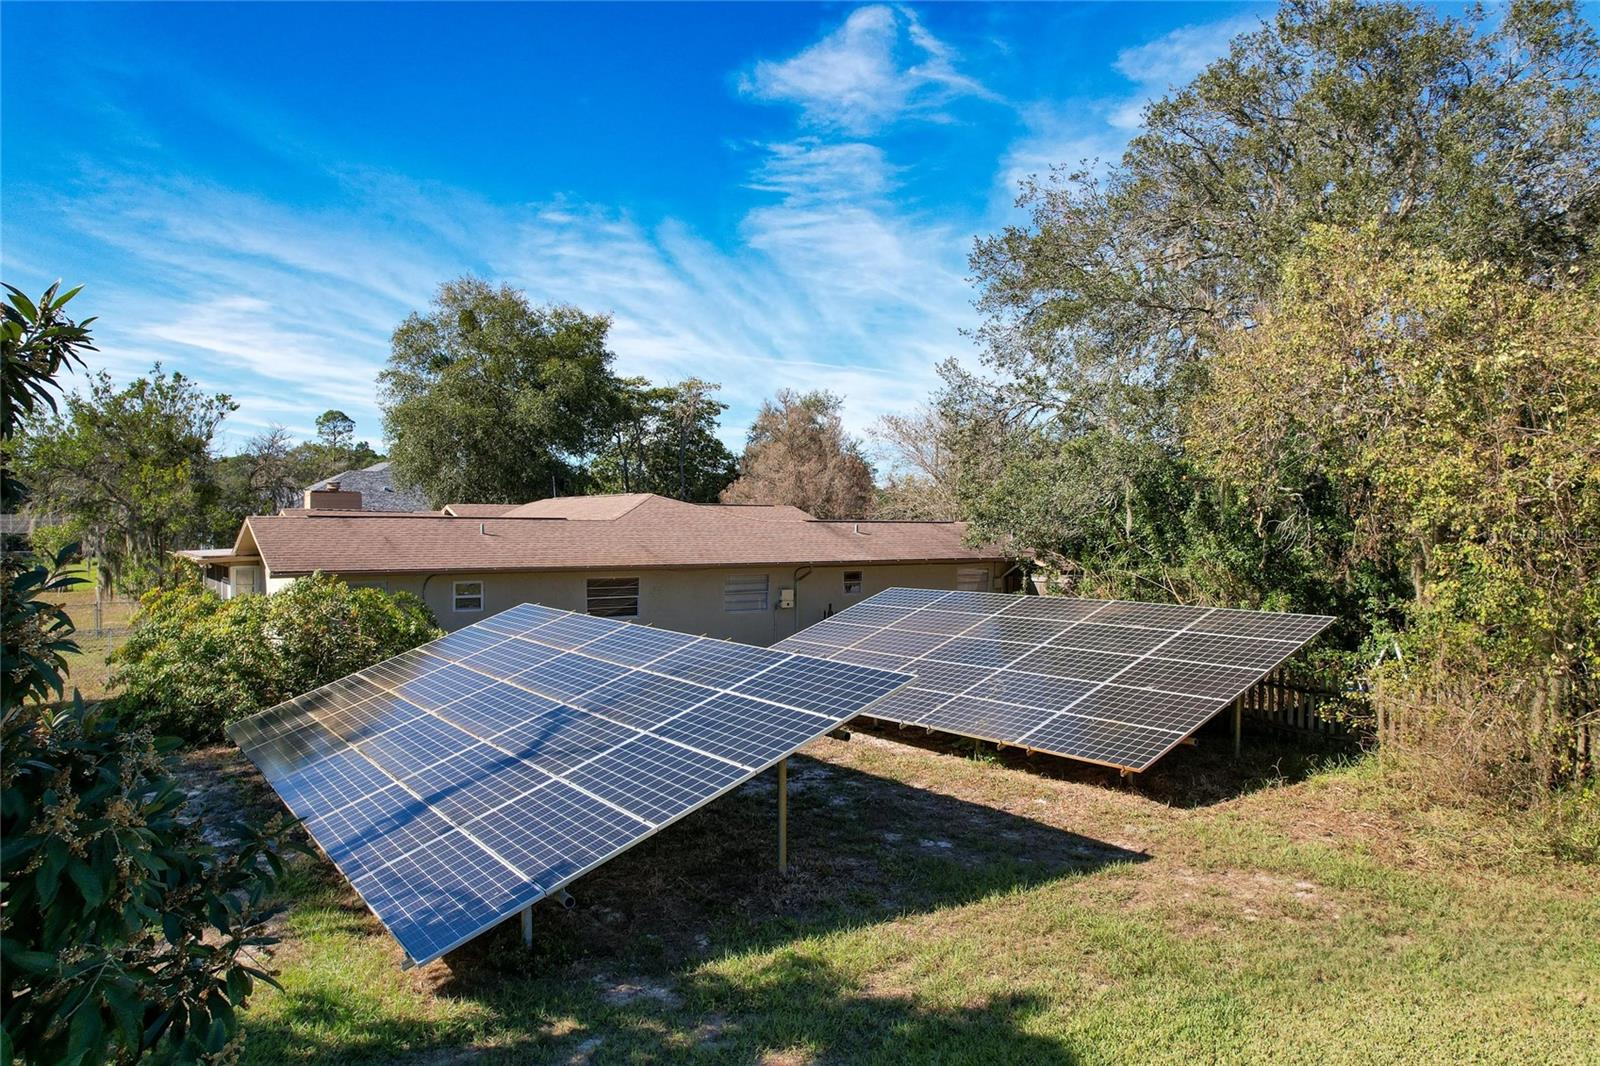 Solar panel systems on the left side of the home